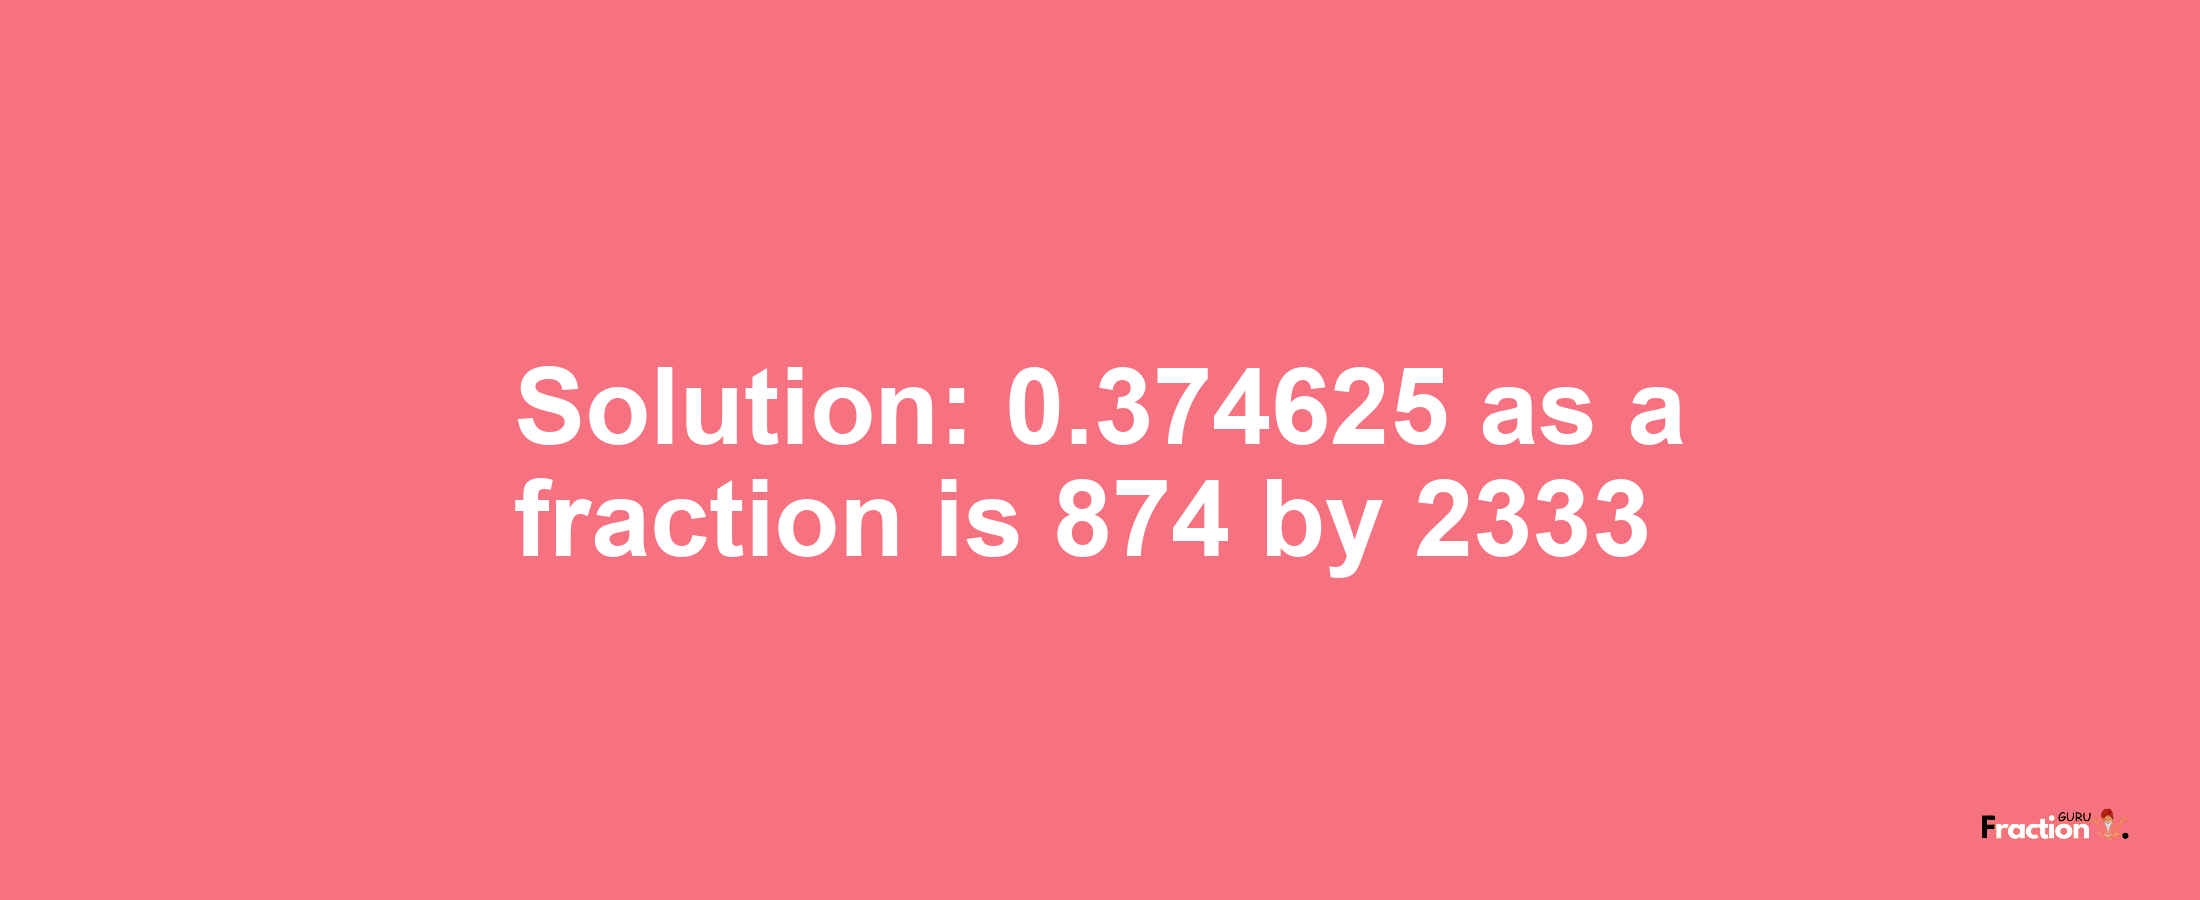 Solution:0.374625 as a fraction is 874/2333